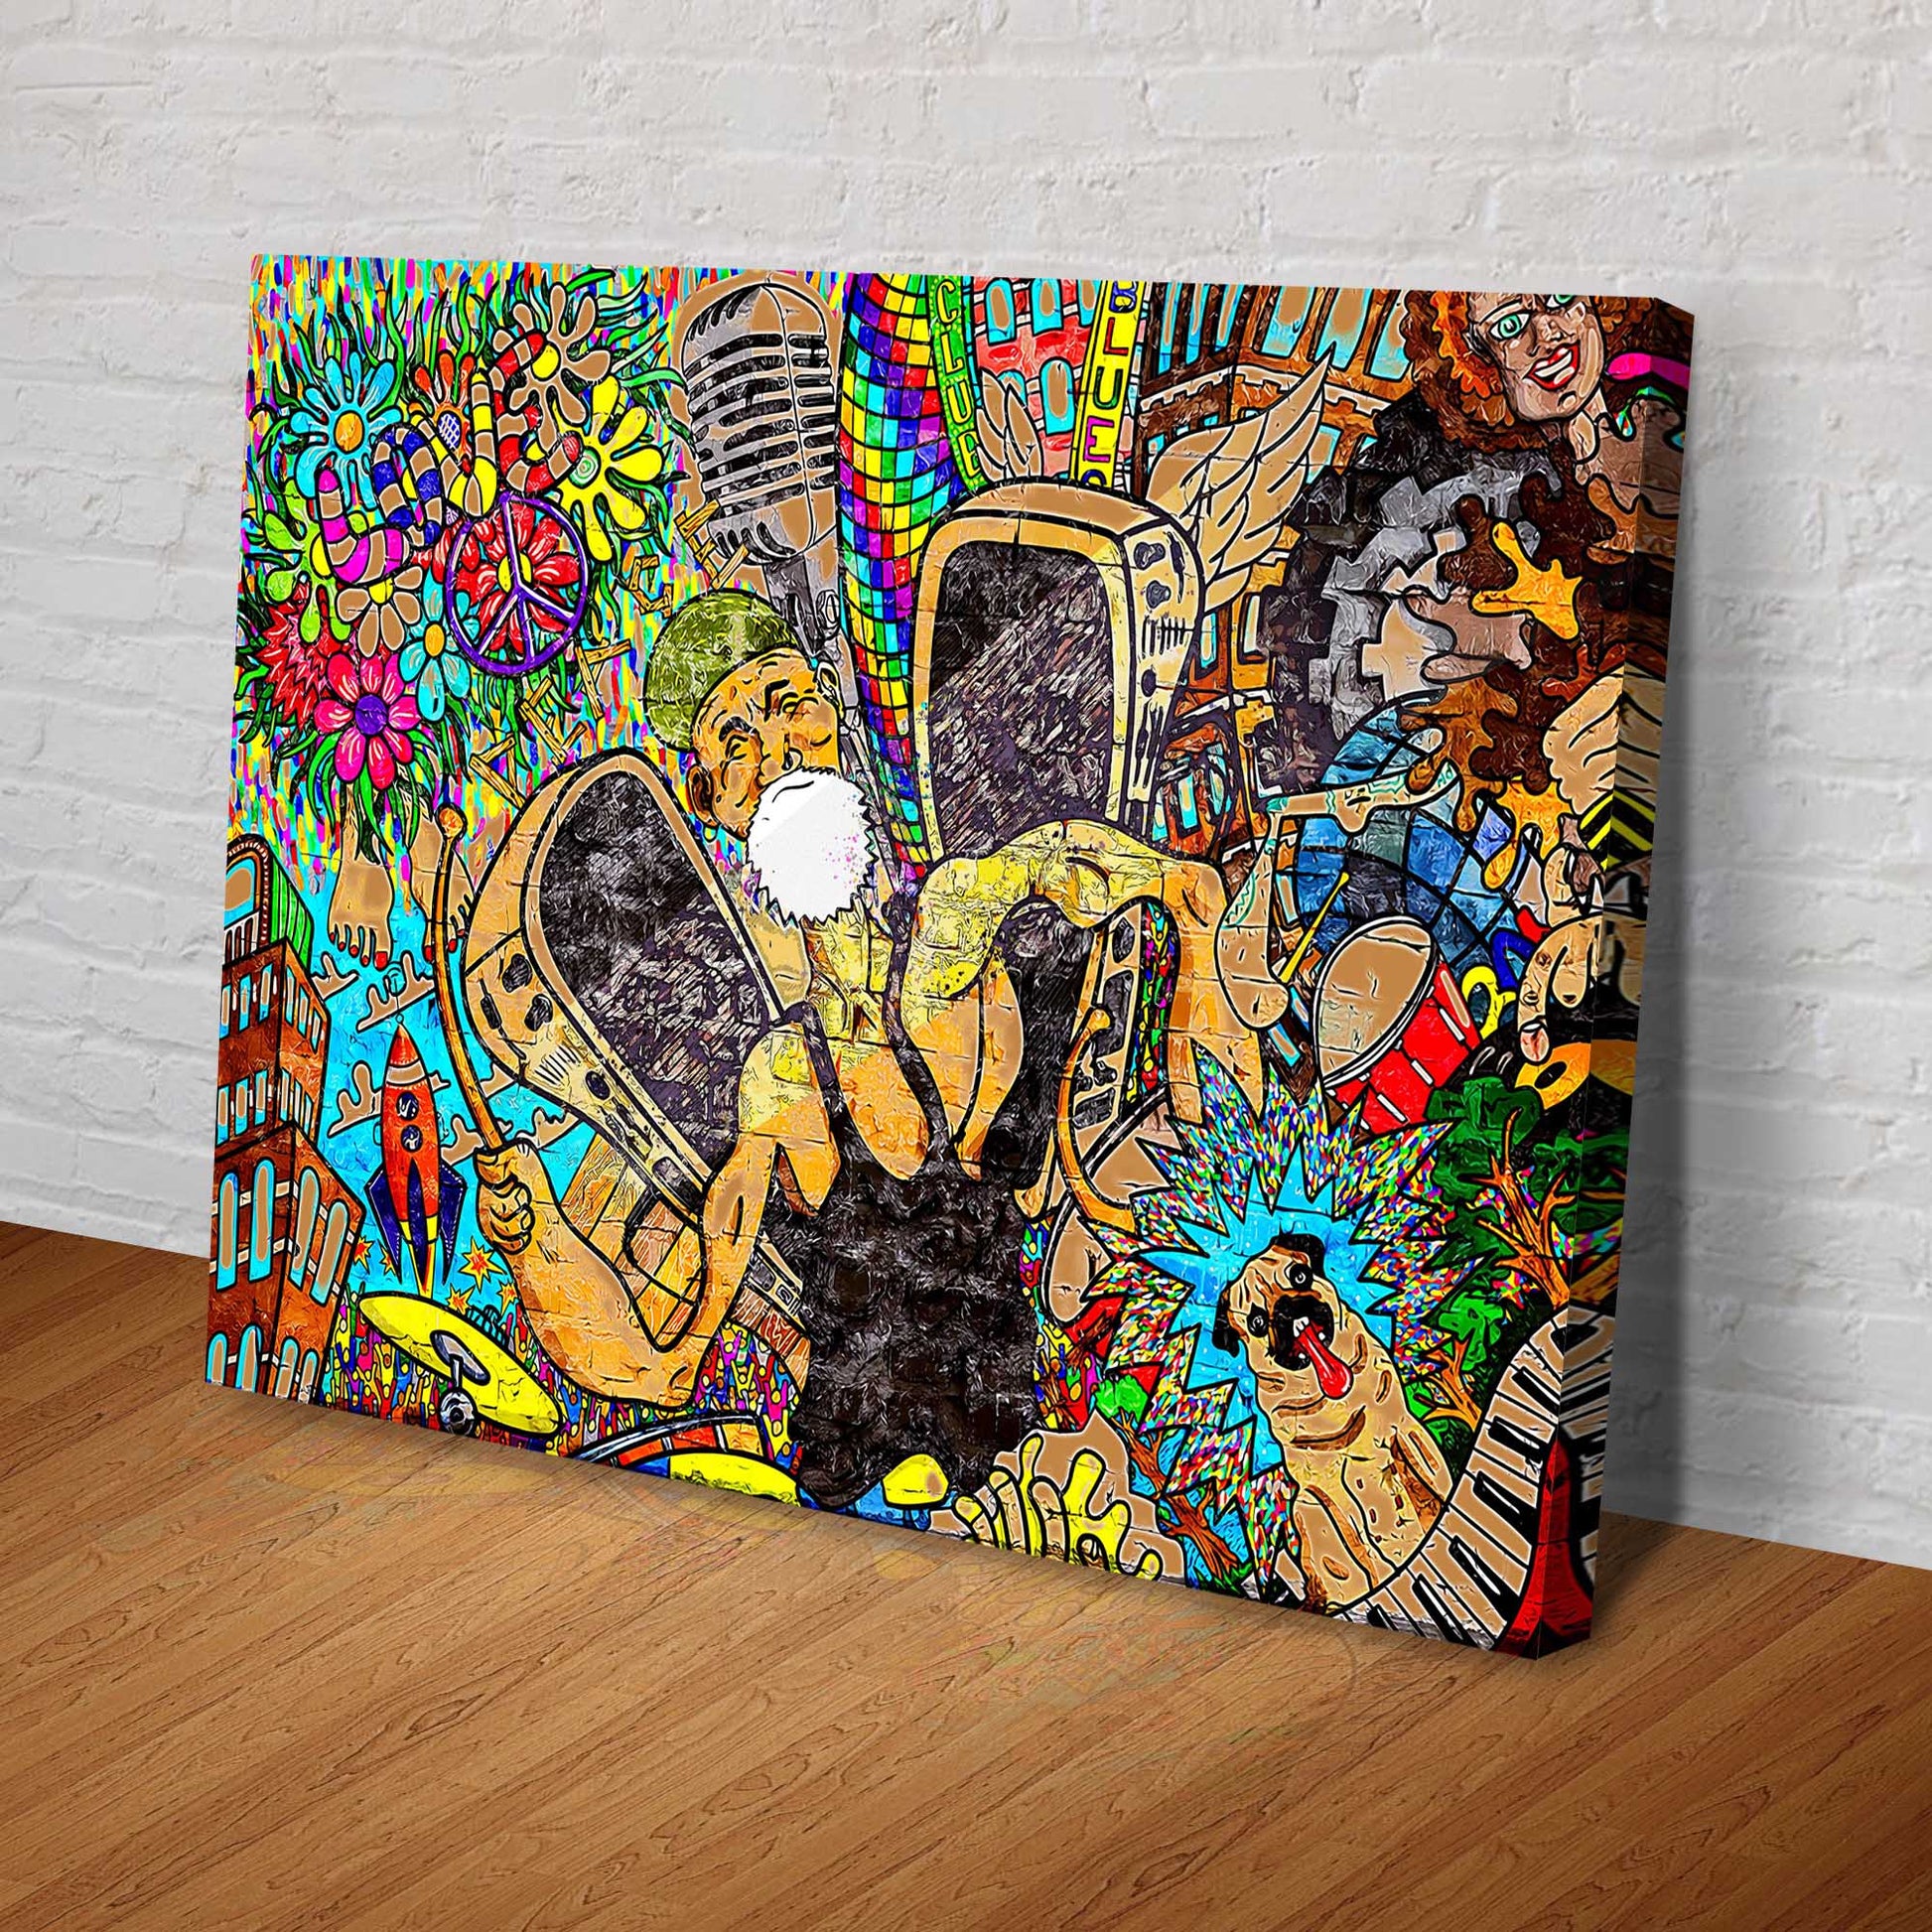 Vibrant Graffiti Canvas Wall Art Style 2 - Image by Tailored Canvases